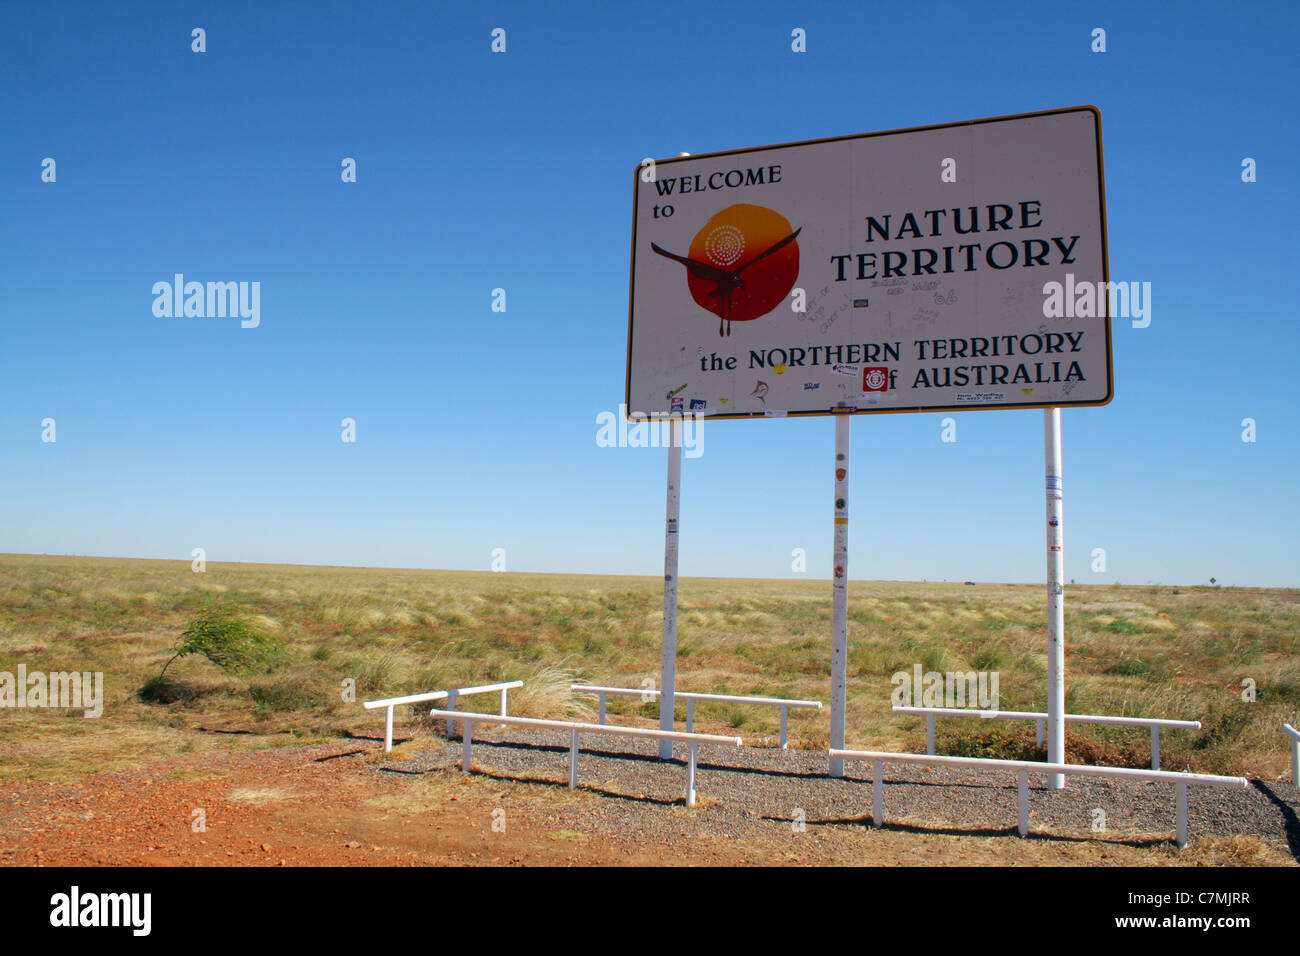 Northern Territory welcome sign in the Outback, Australia Stock Photo